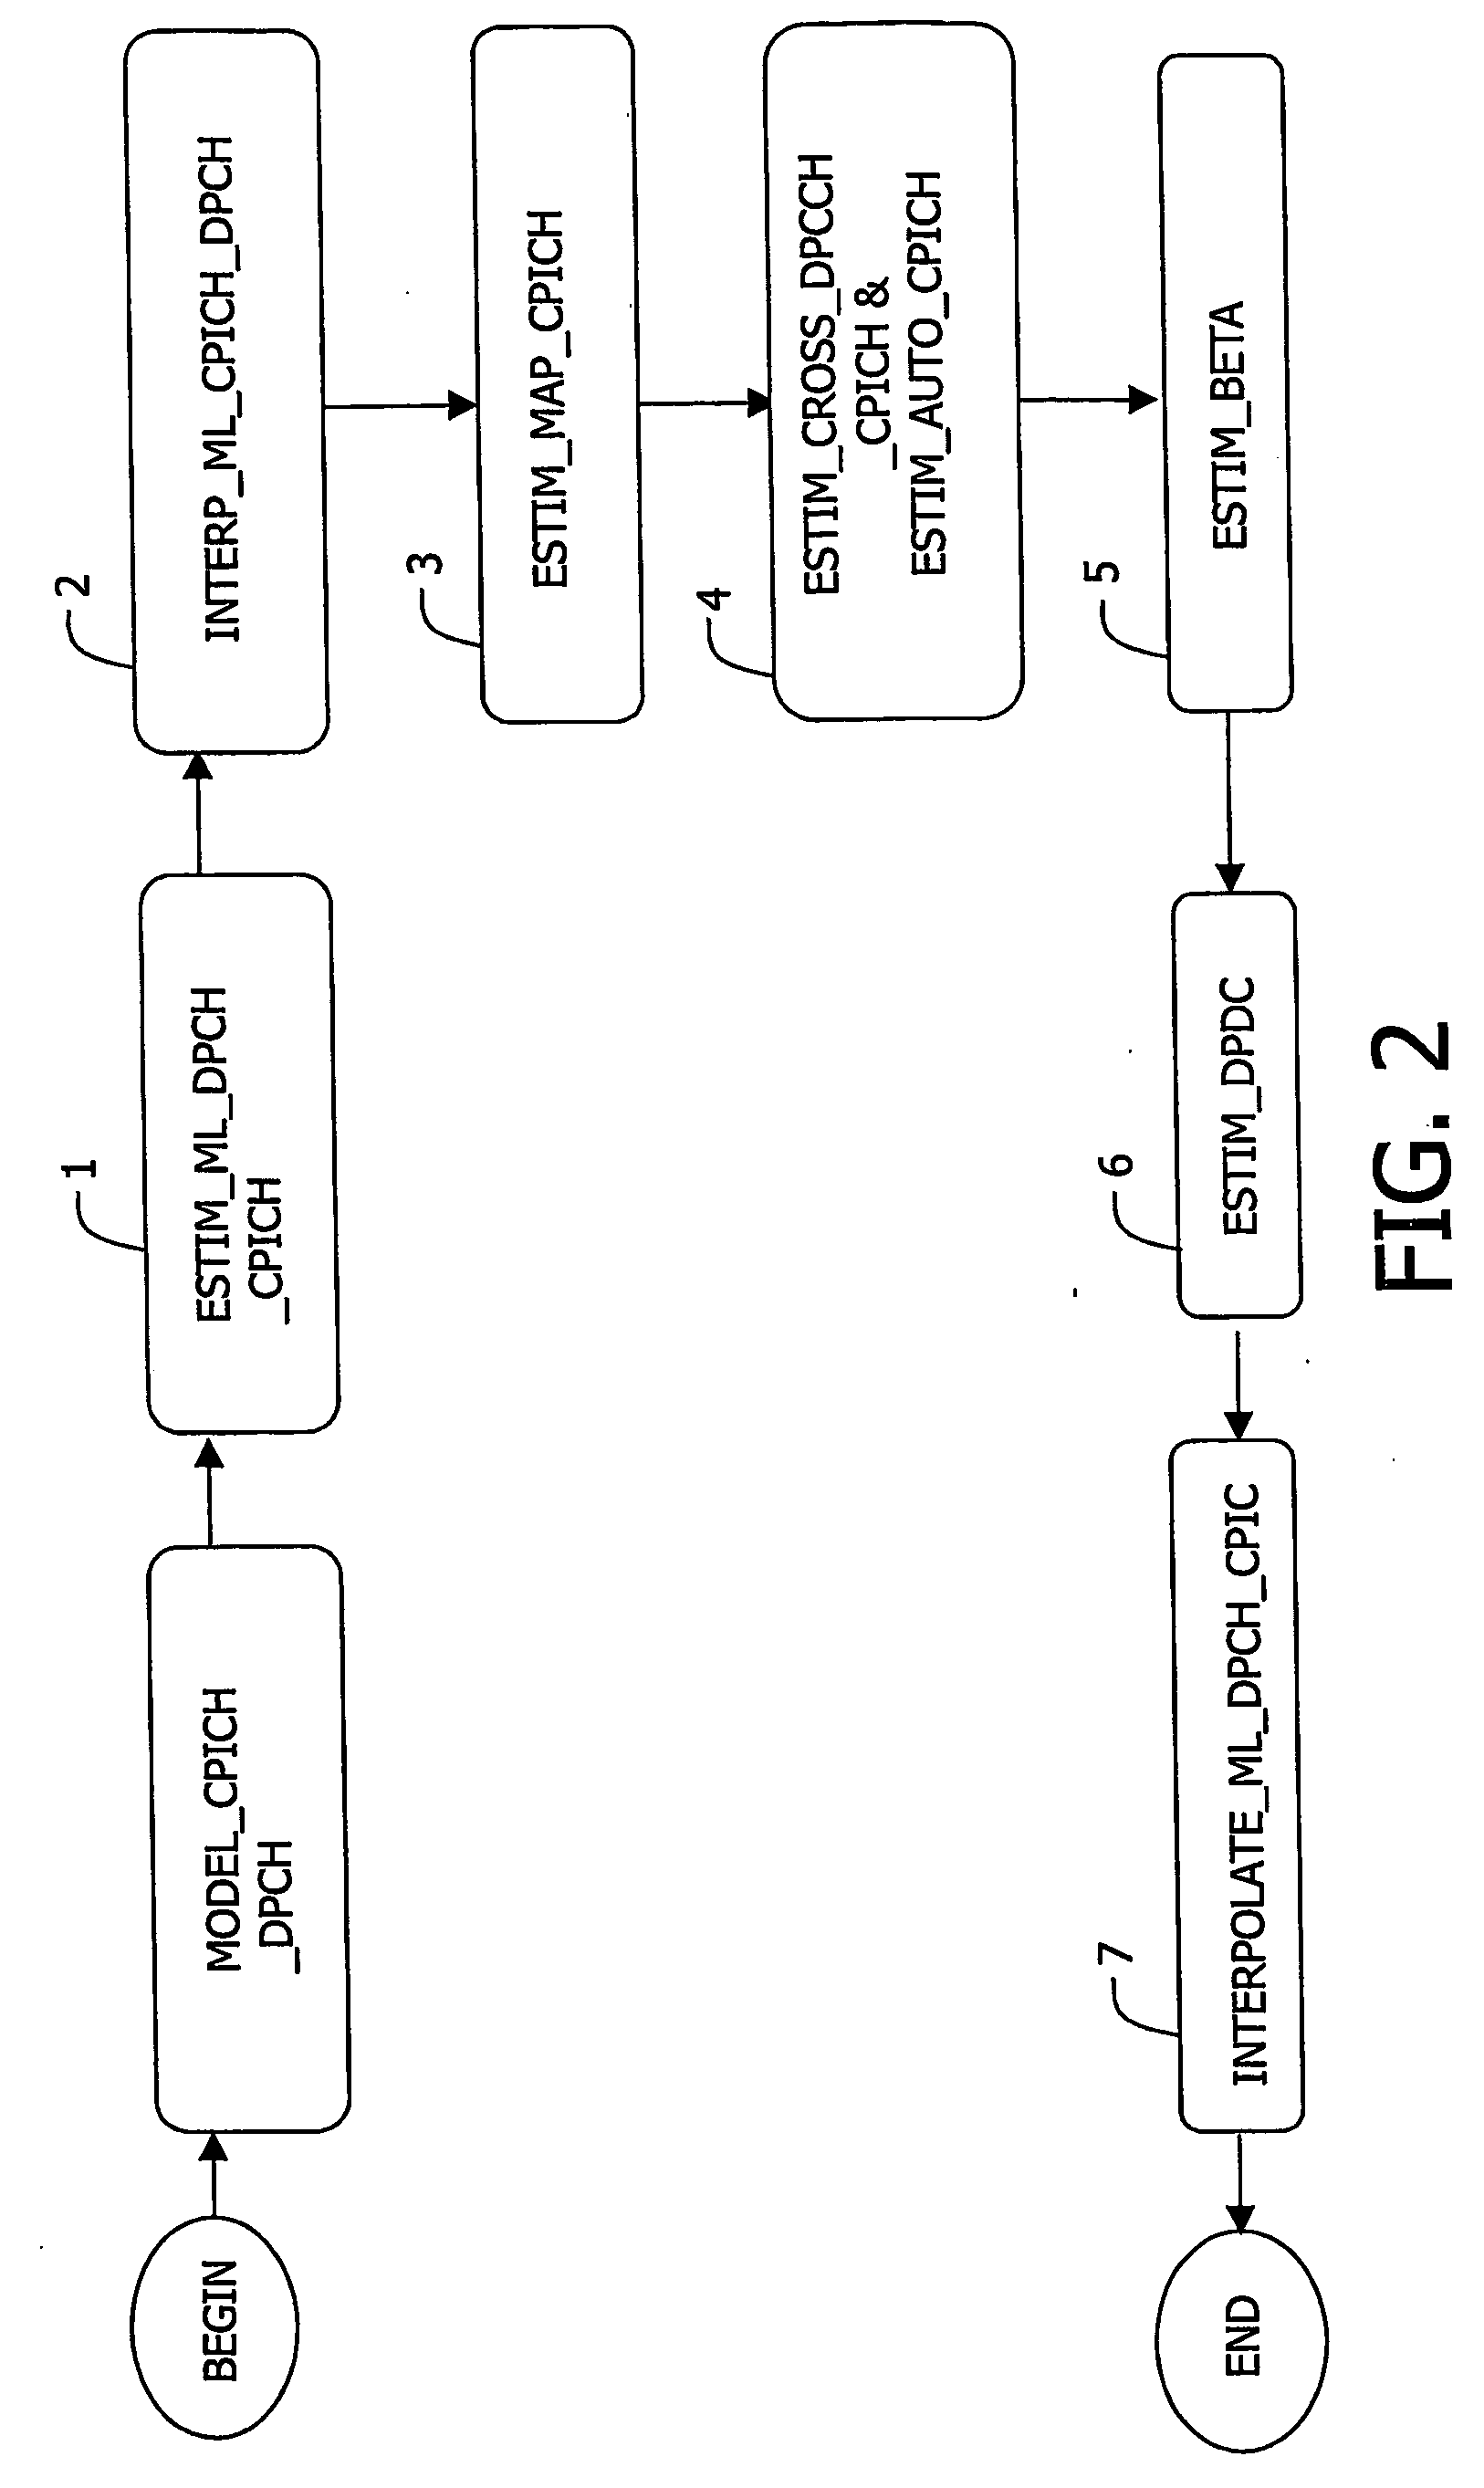 Methods for channel estimation in the presence of transmit beamforming